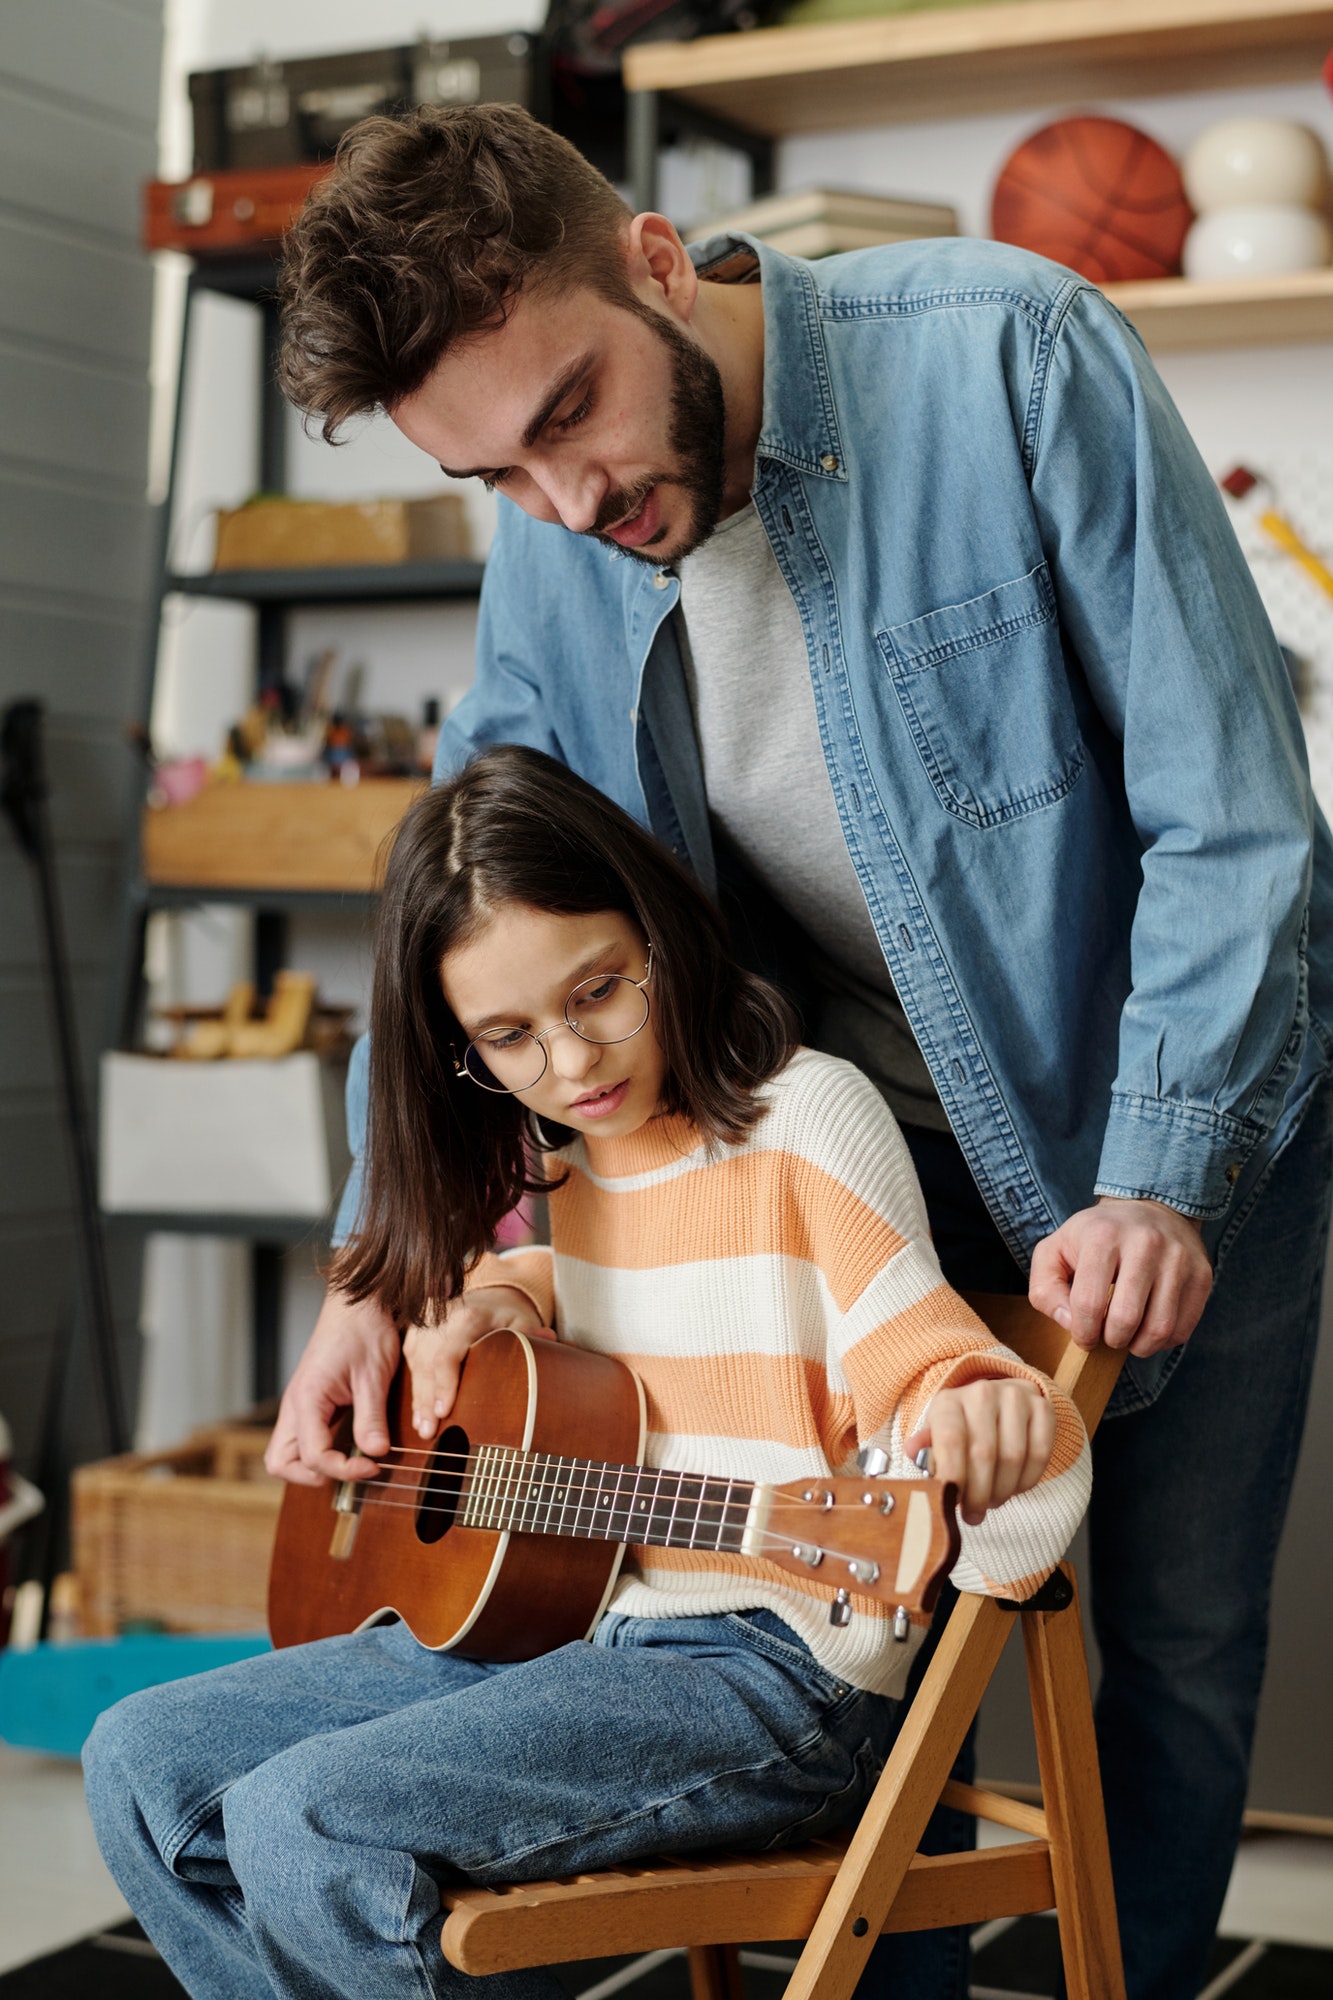 Cute little girl fitting strings of guitar before lesson of music with her tutor